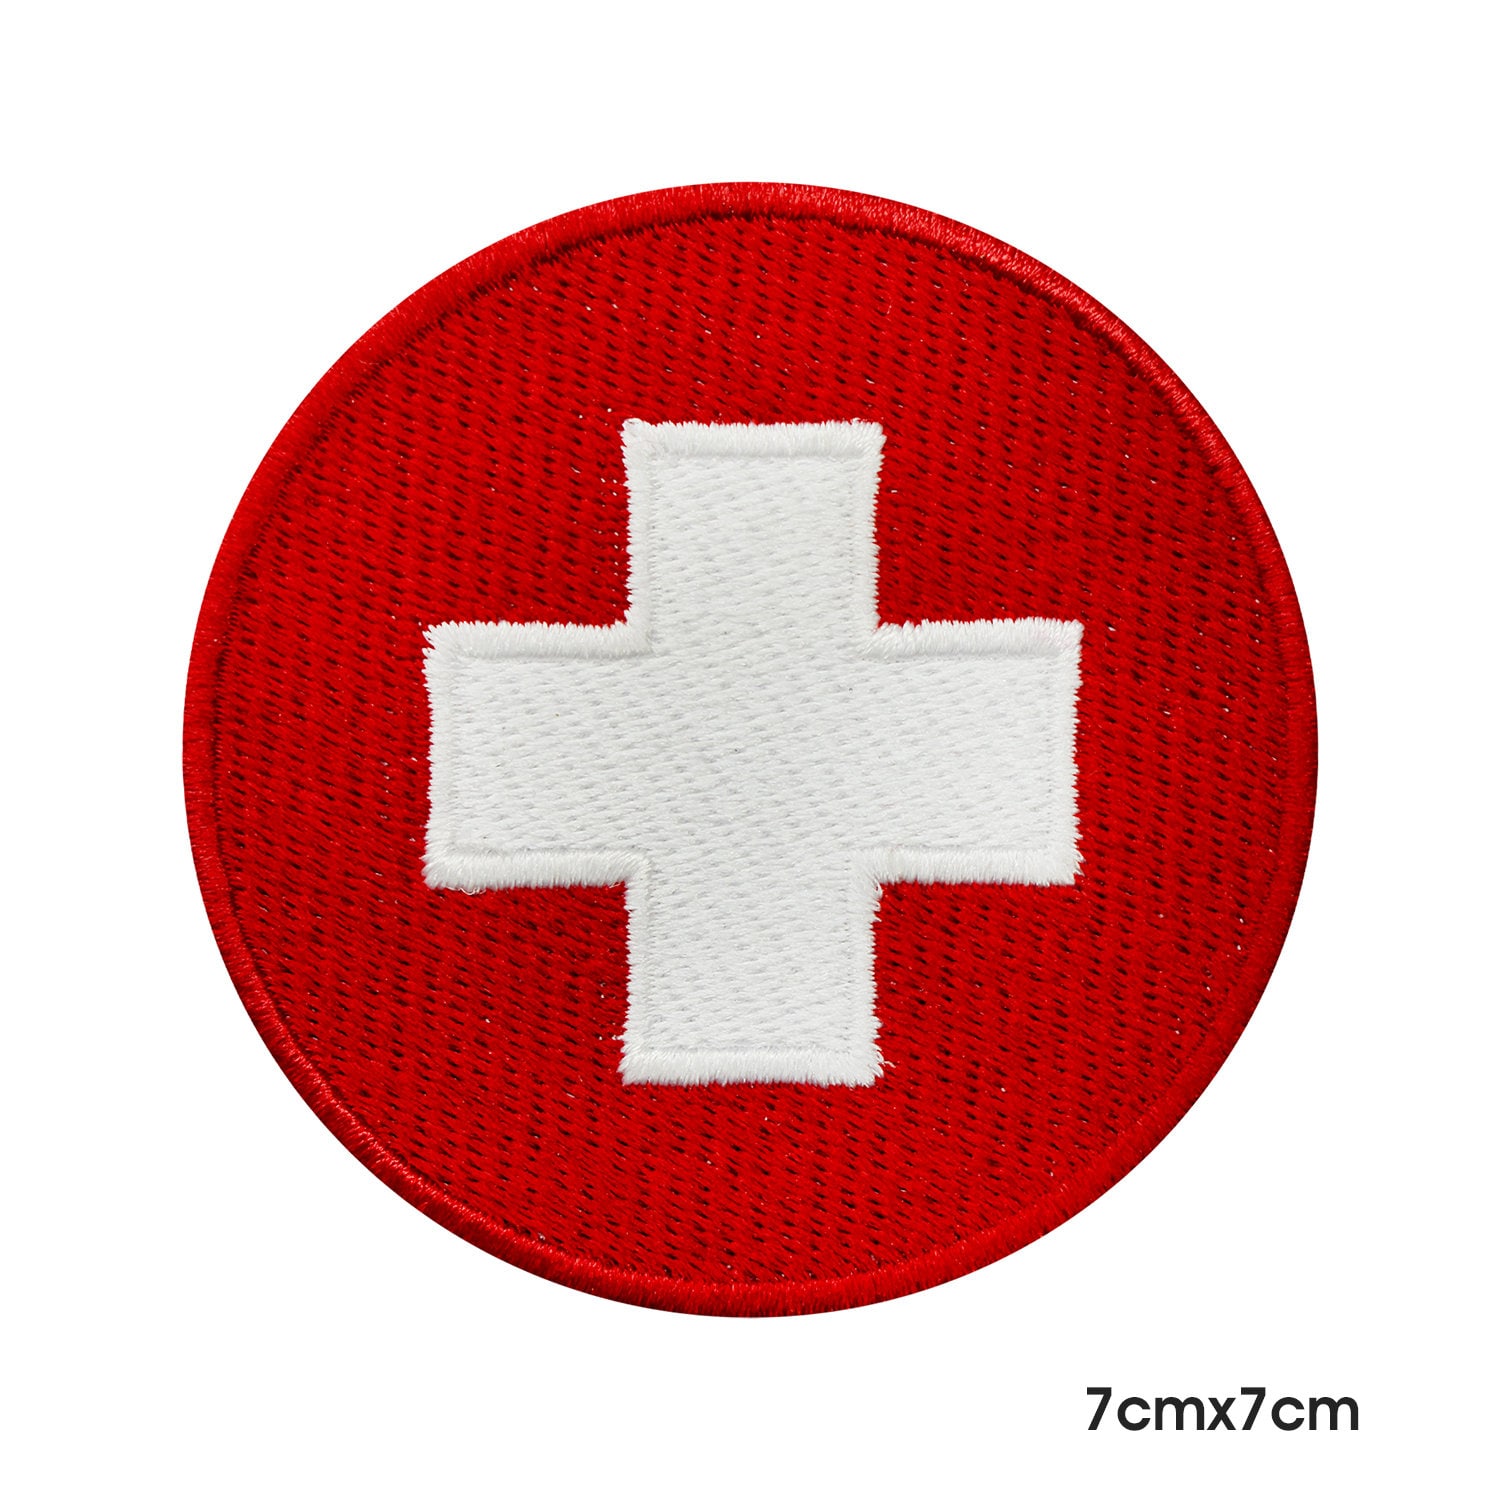 Medic Patch (Glow in the dark)